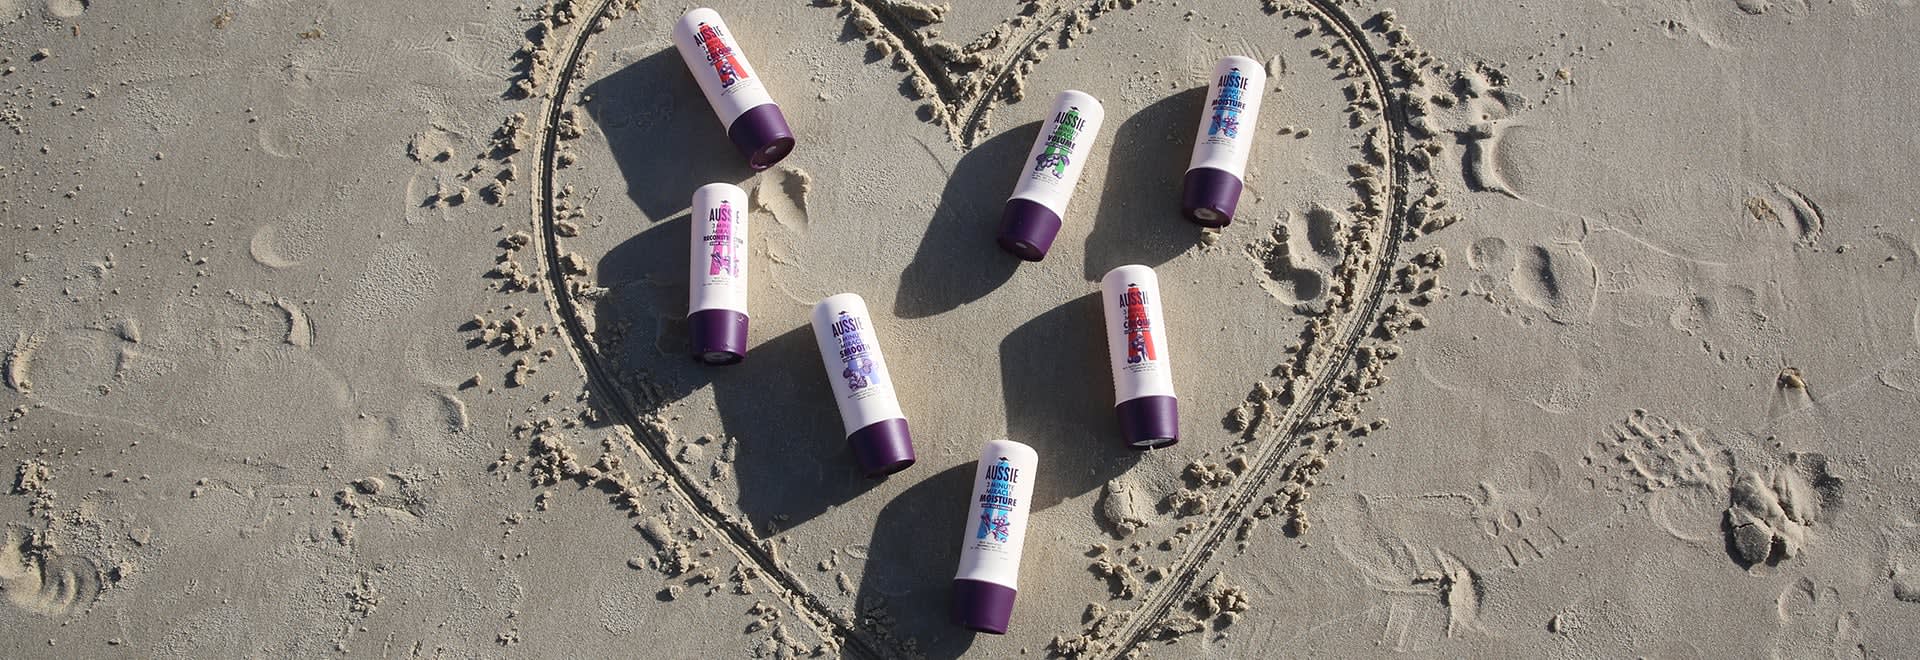 A photo of Aussie products lying on a beach in the middle of heart made in the sand